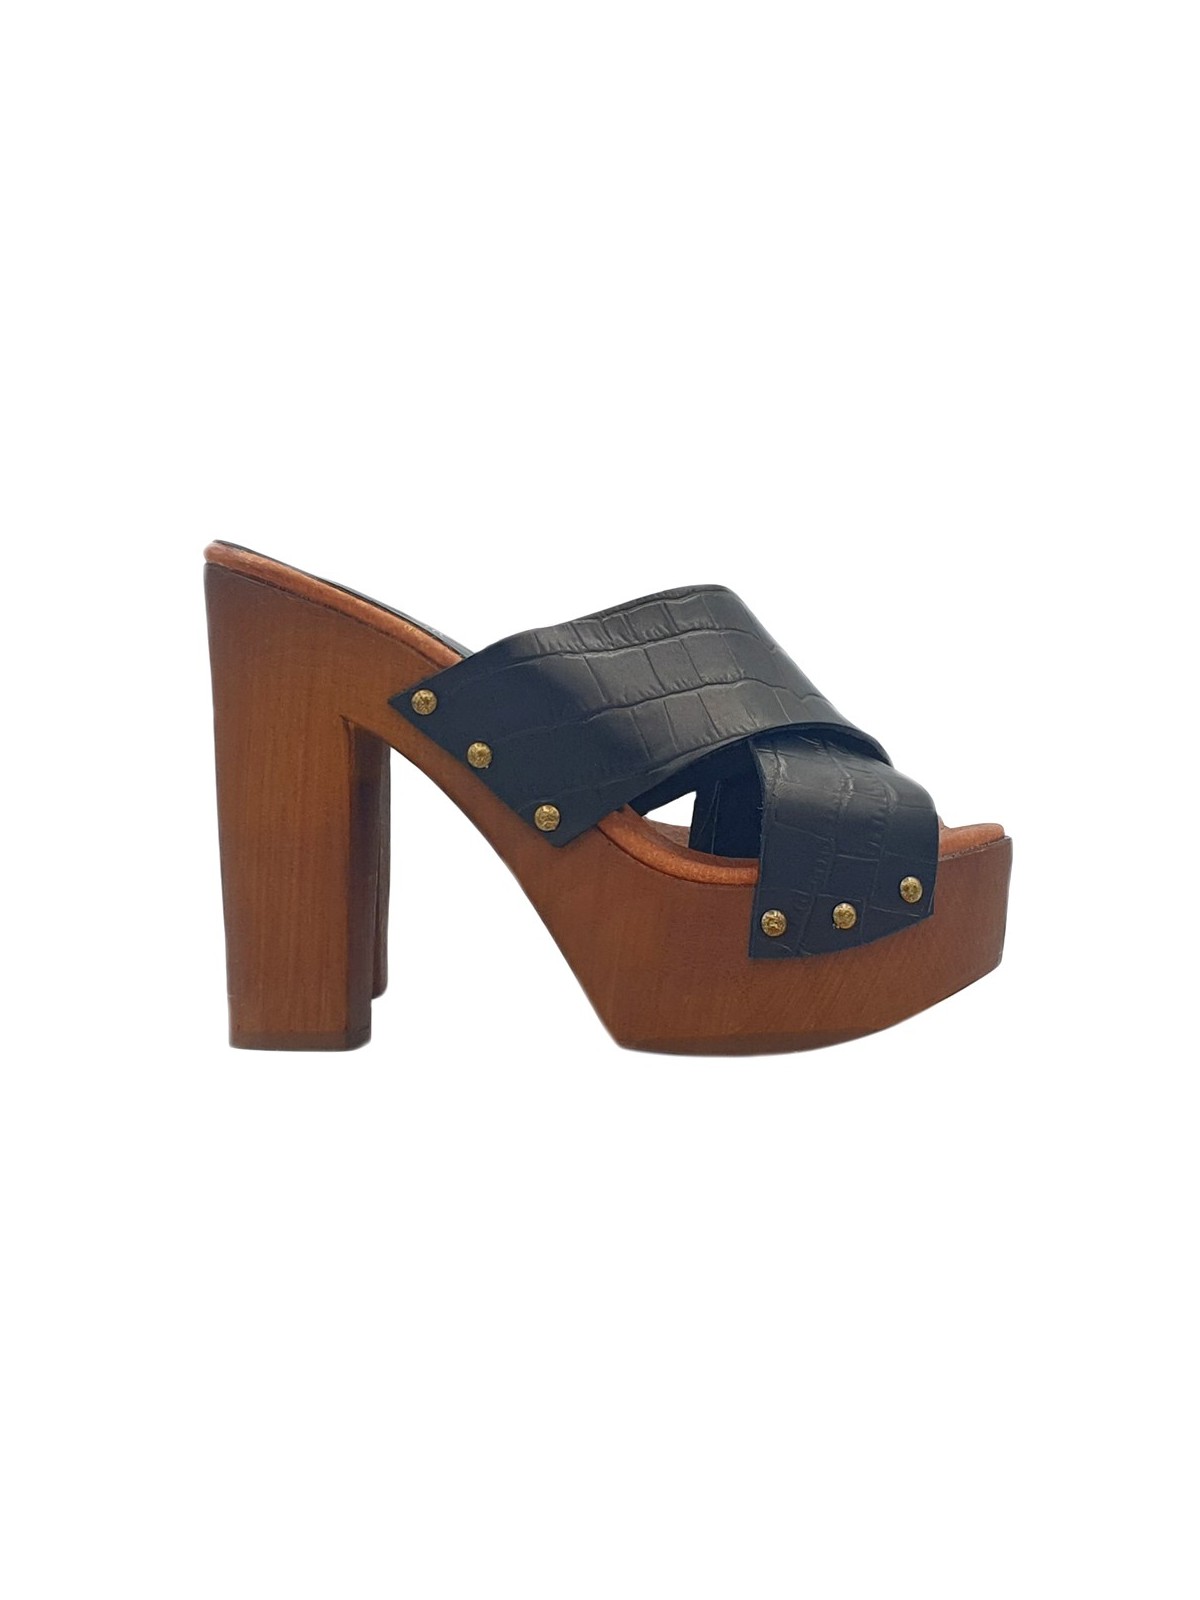 BLACK WOMEN'S CLOGS WITH CROSSED BANDS